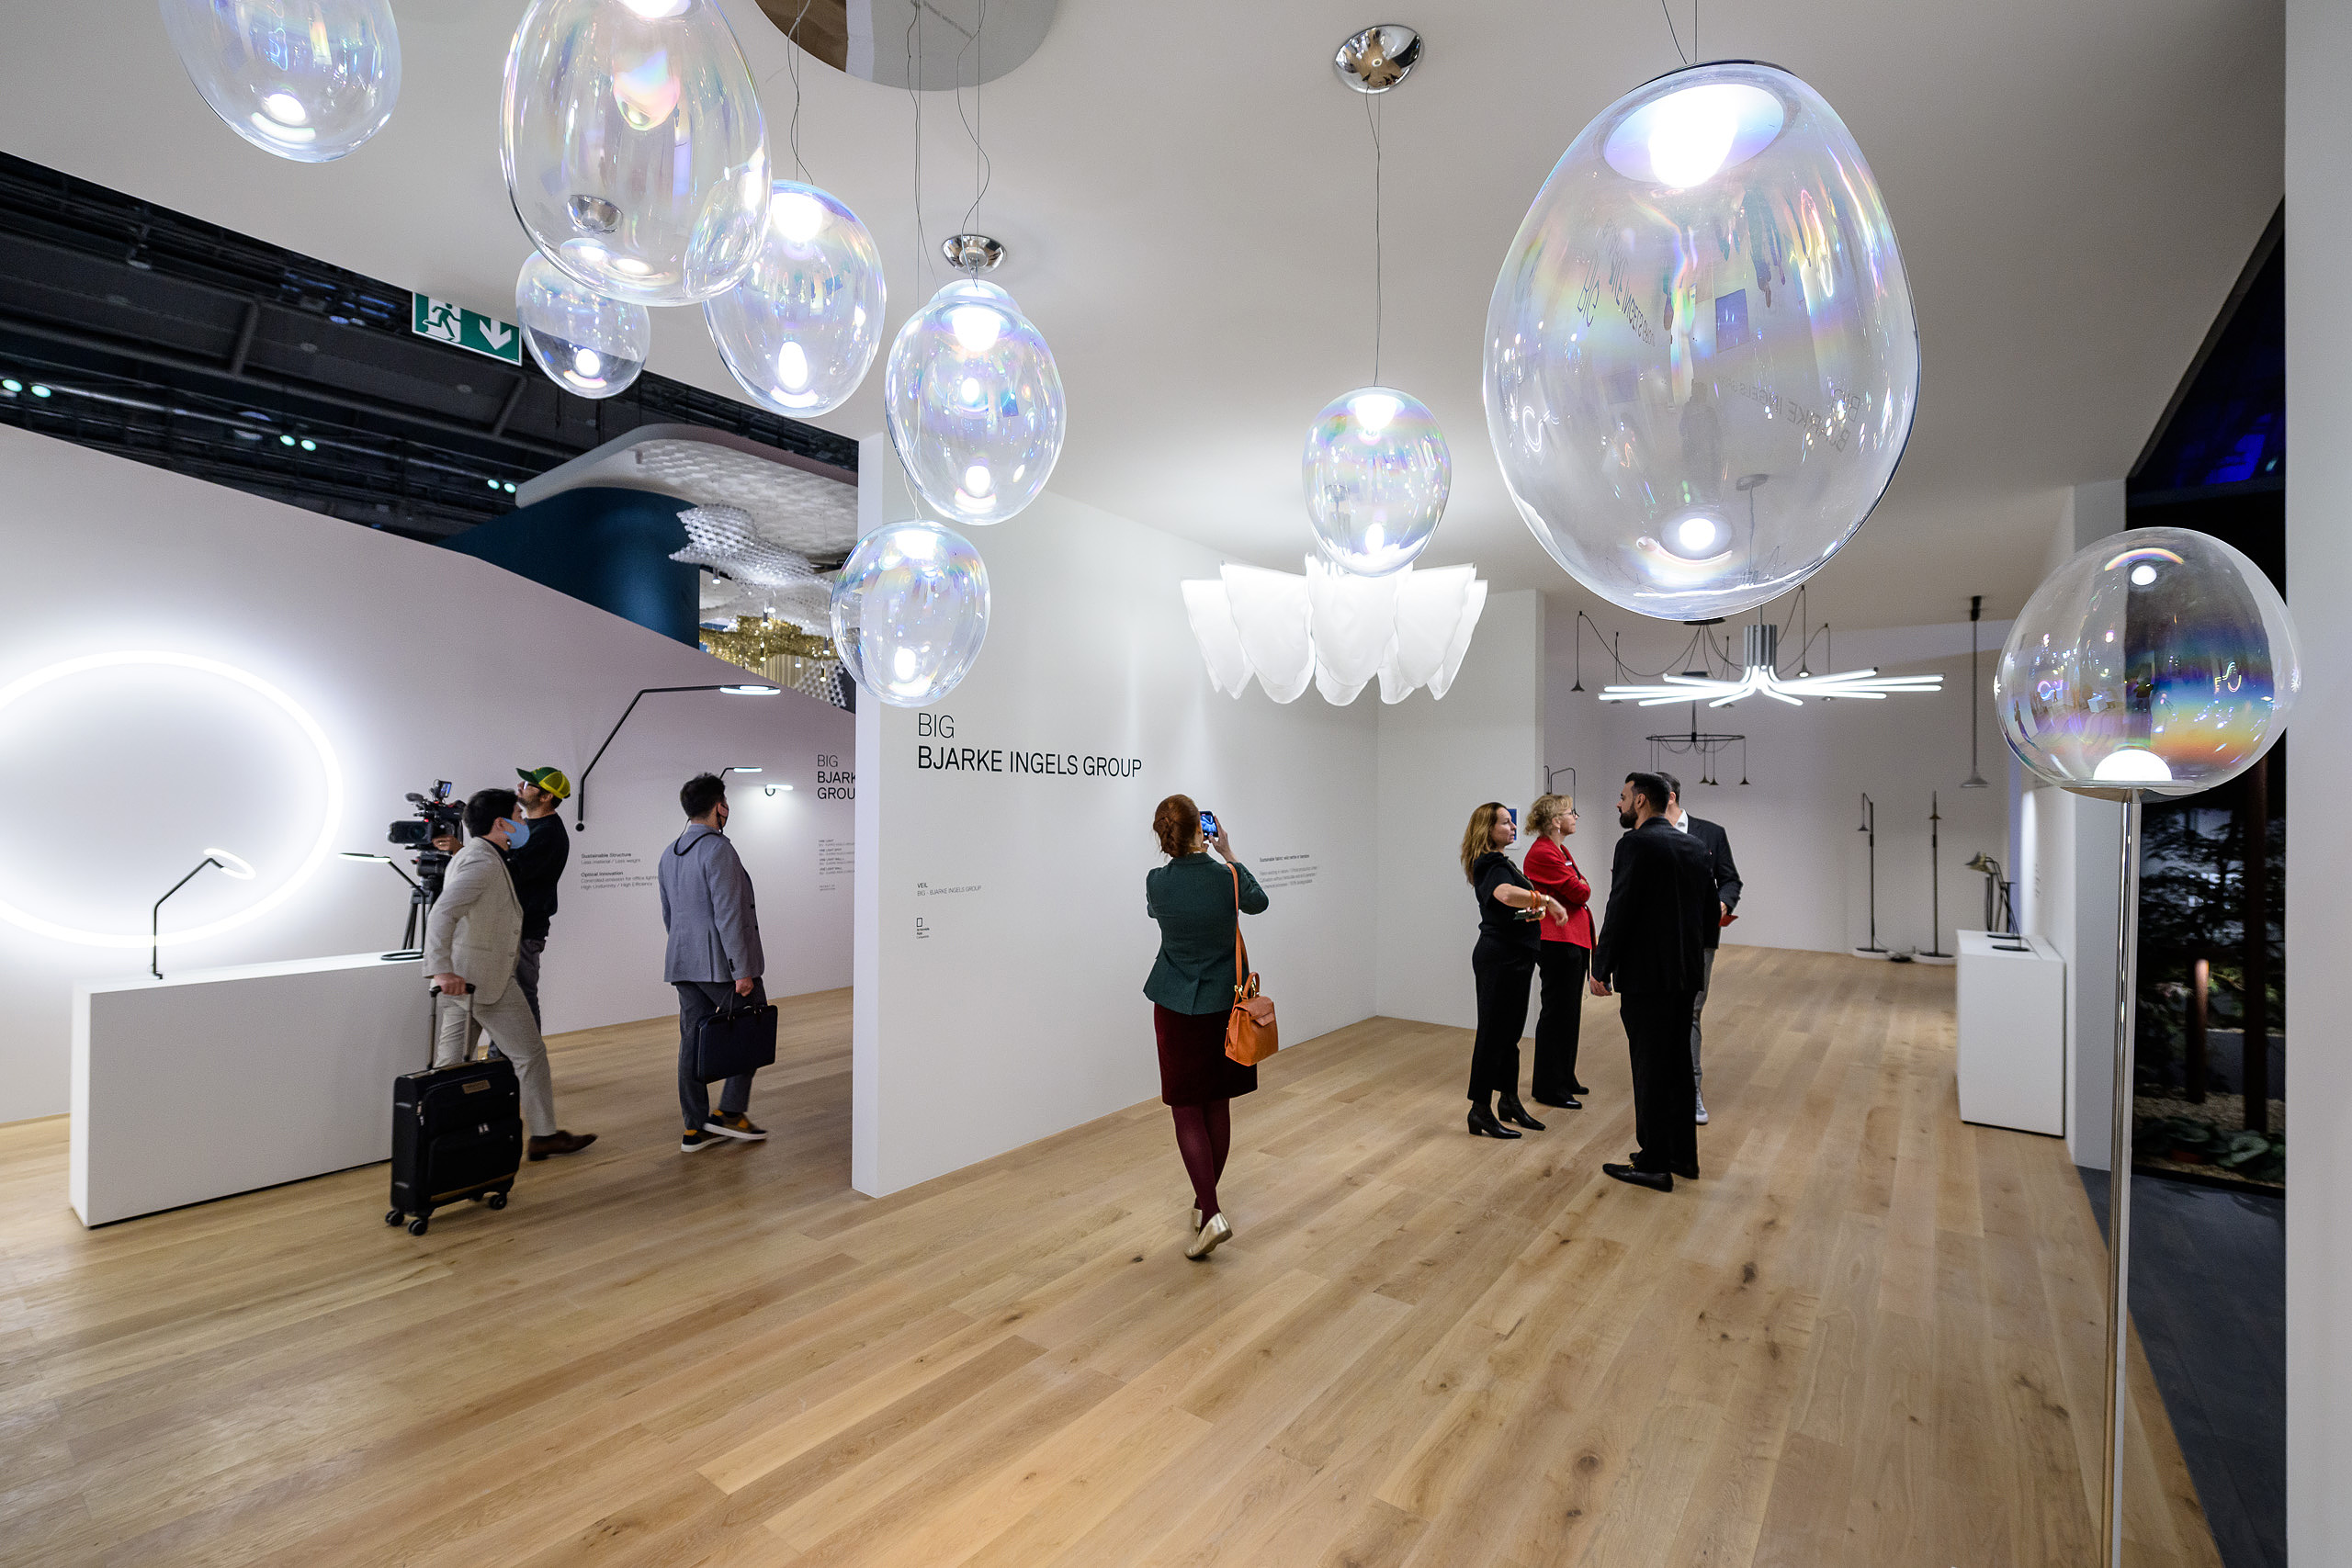 Beautiful hand-crafted luminaires seem to float in the room like shimmering soap bubbles